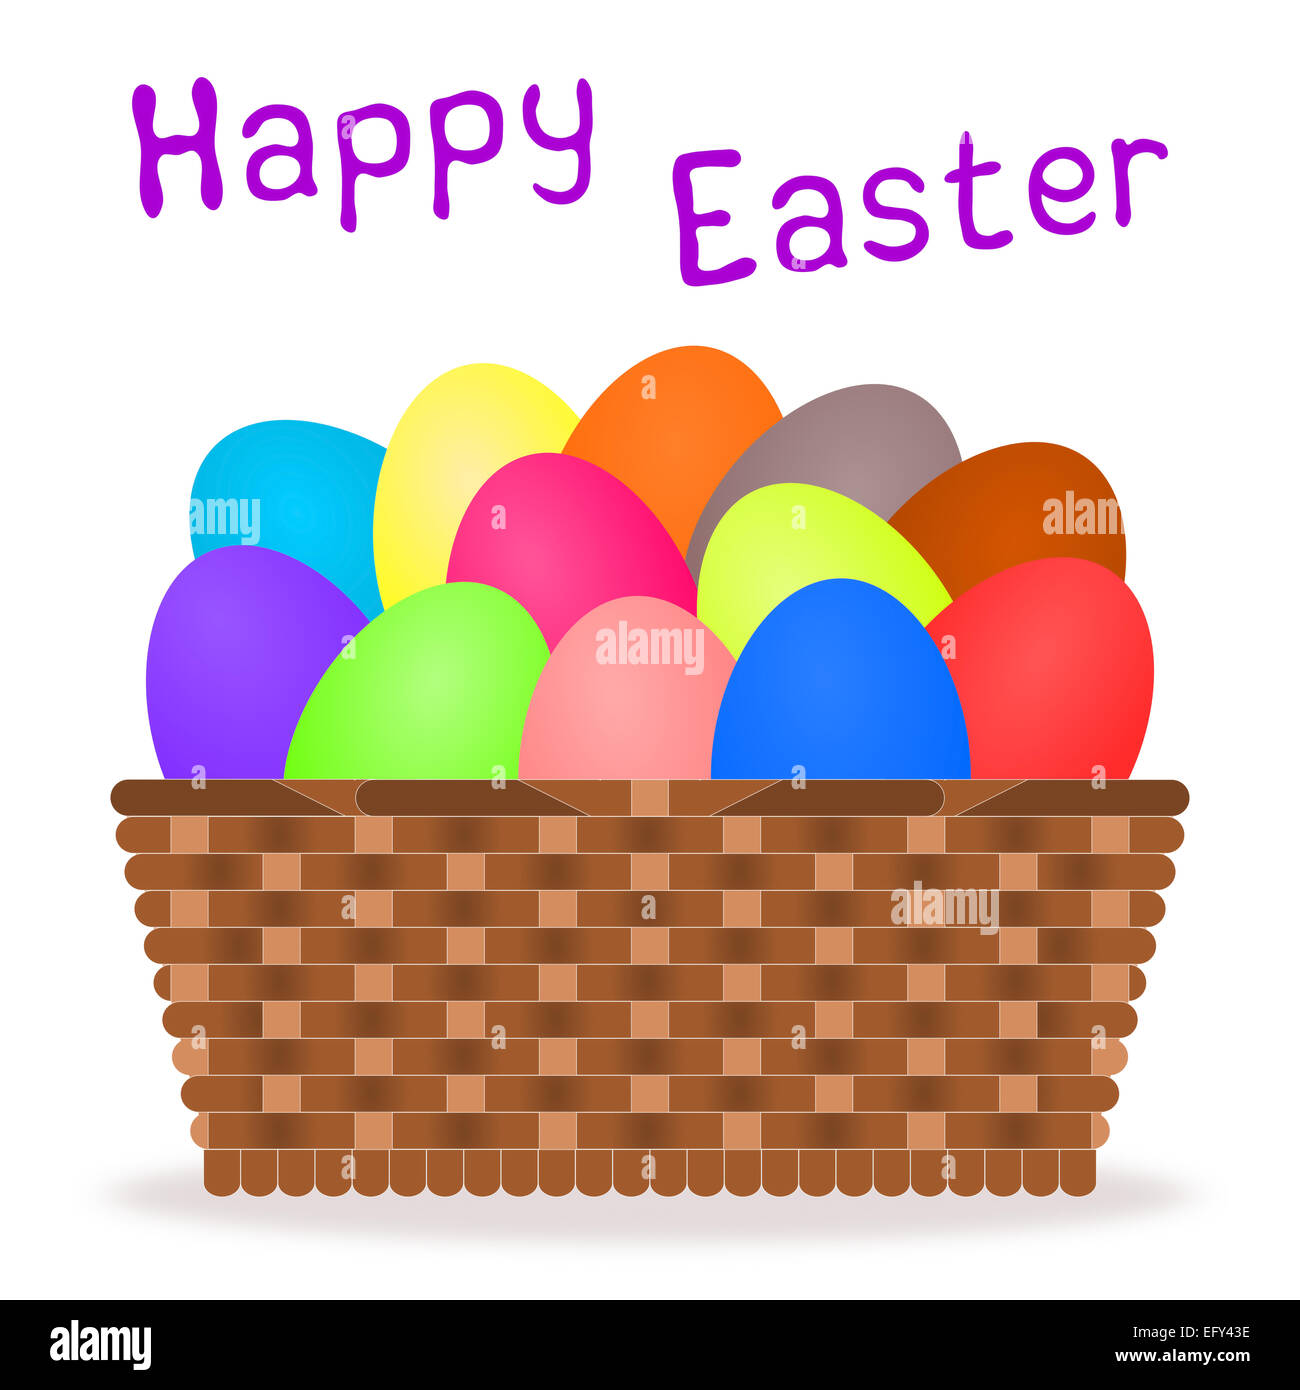 Handwritten message with a basket containing colorful easter eggs. Isolated on white. Stock Photo